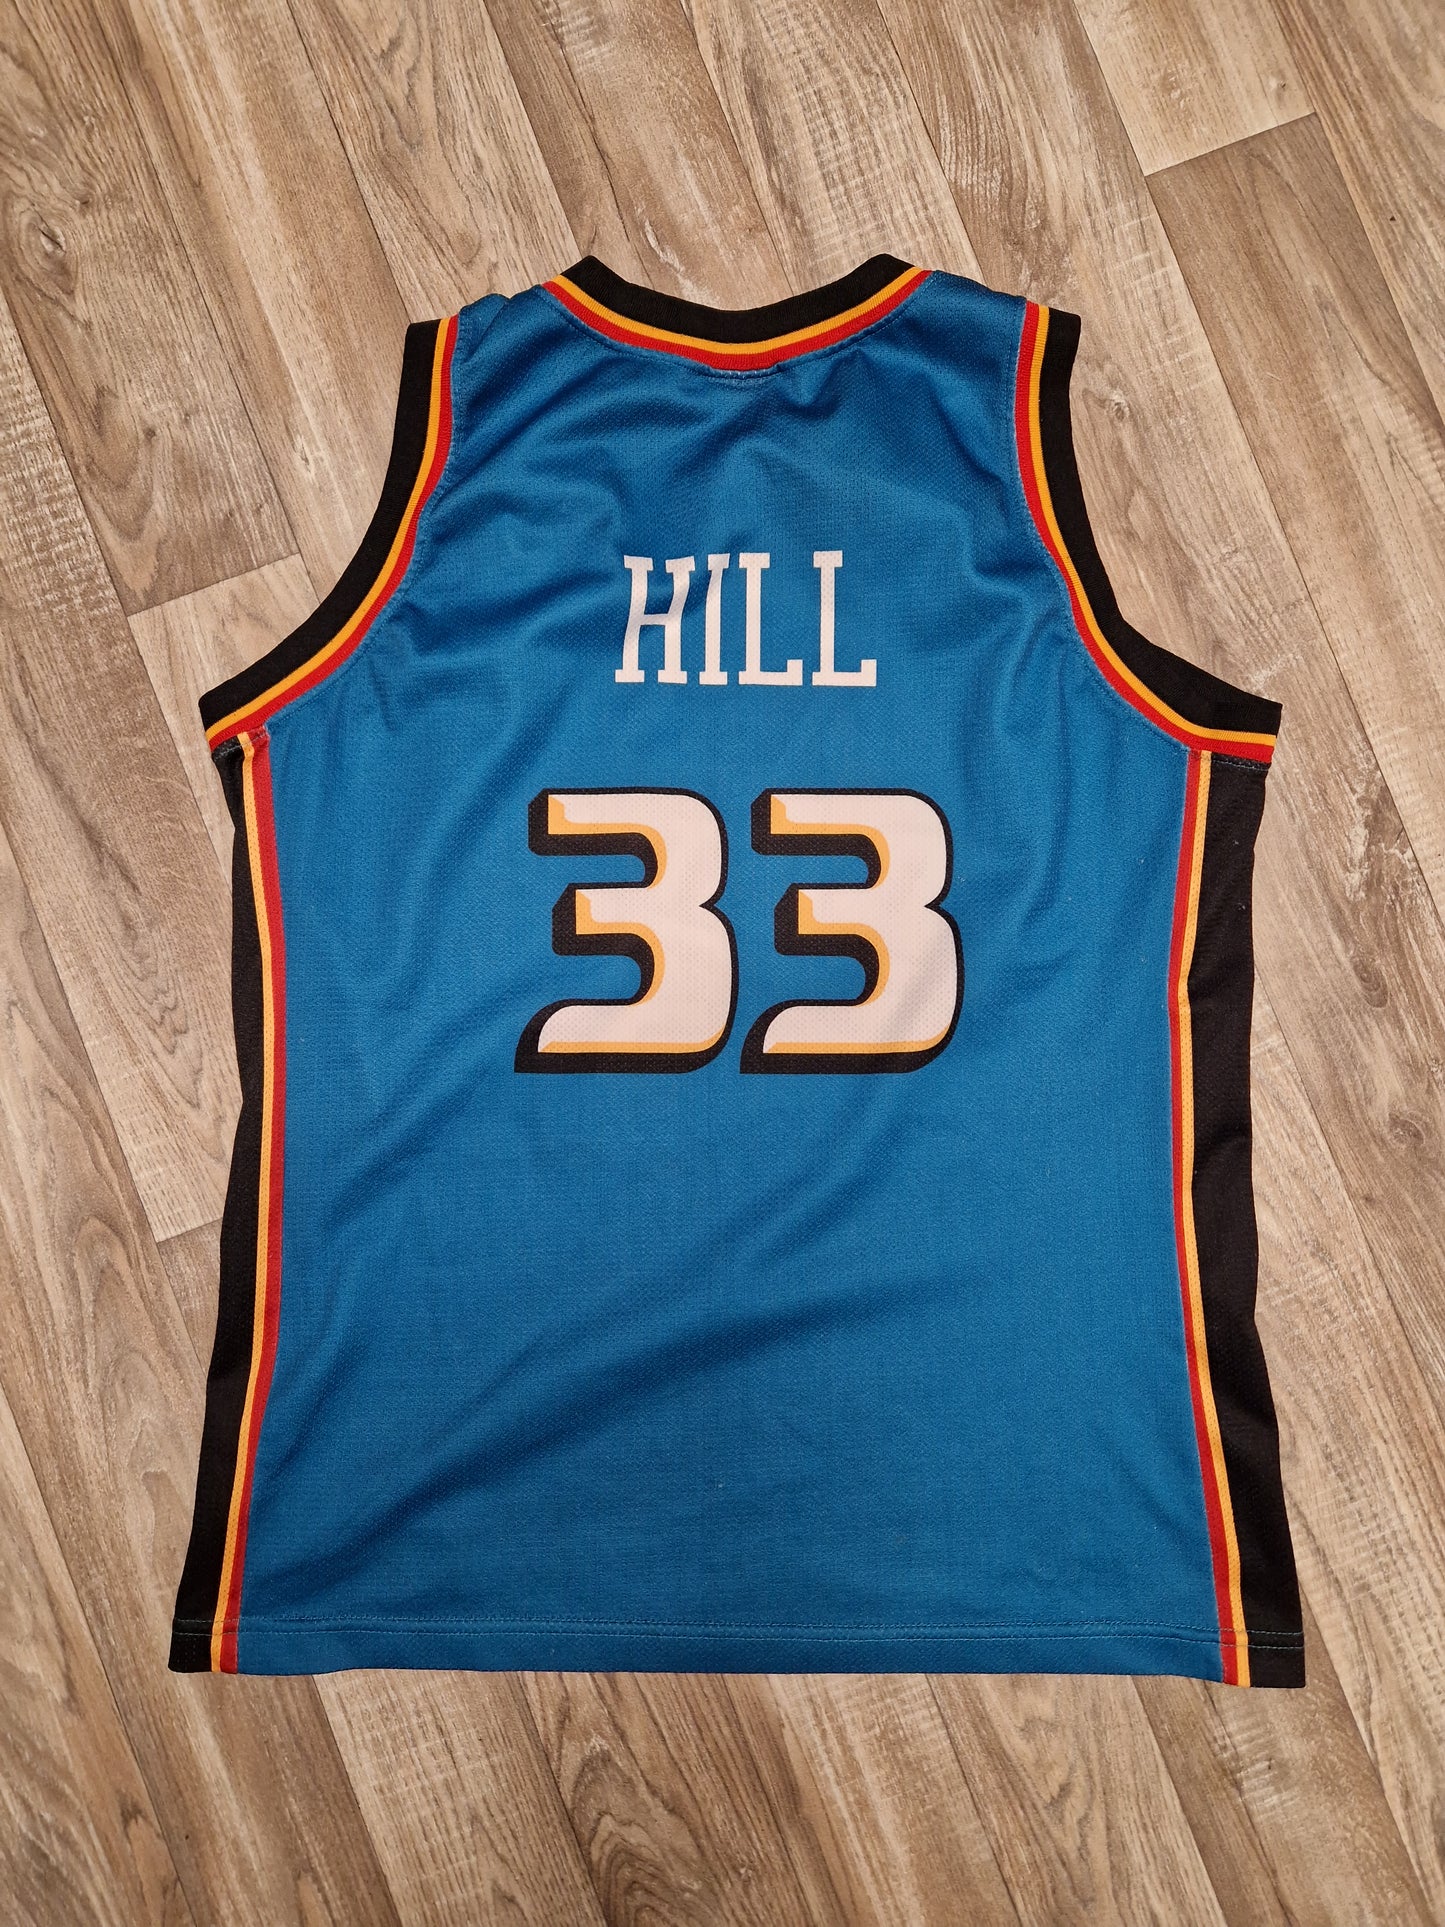 Grant Hill Detroit Piatons Jersey Size Large